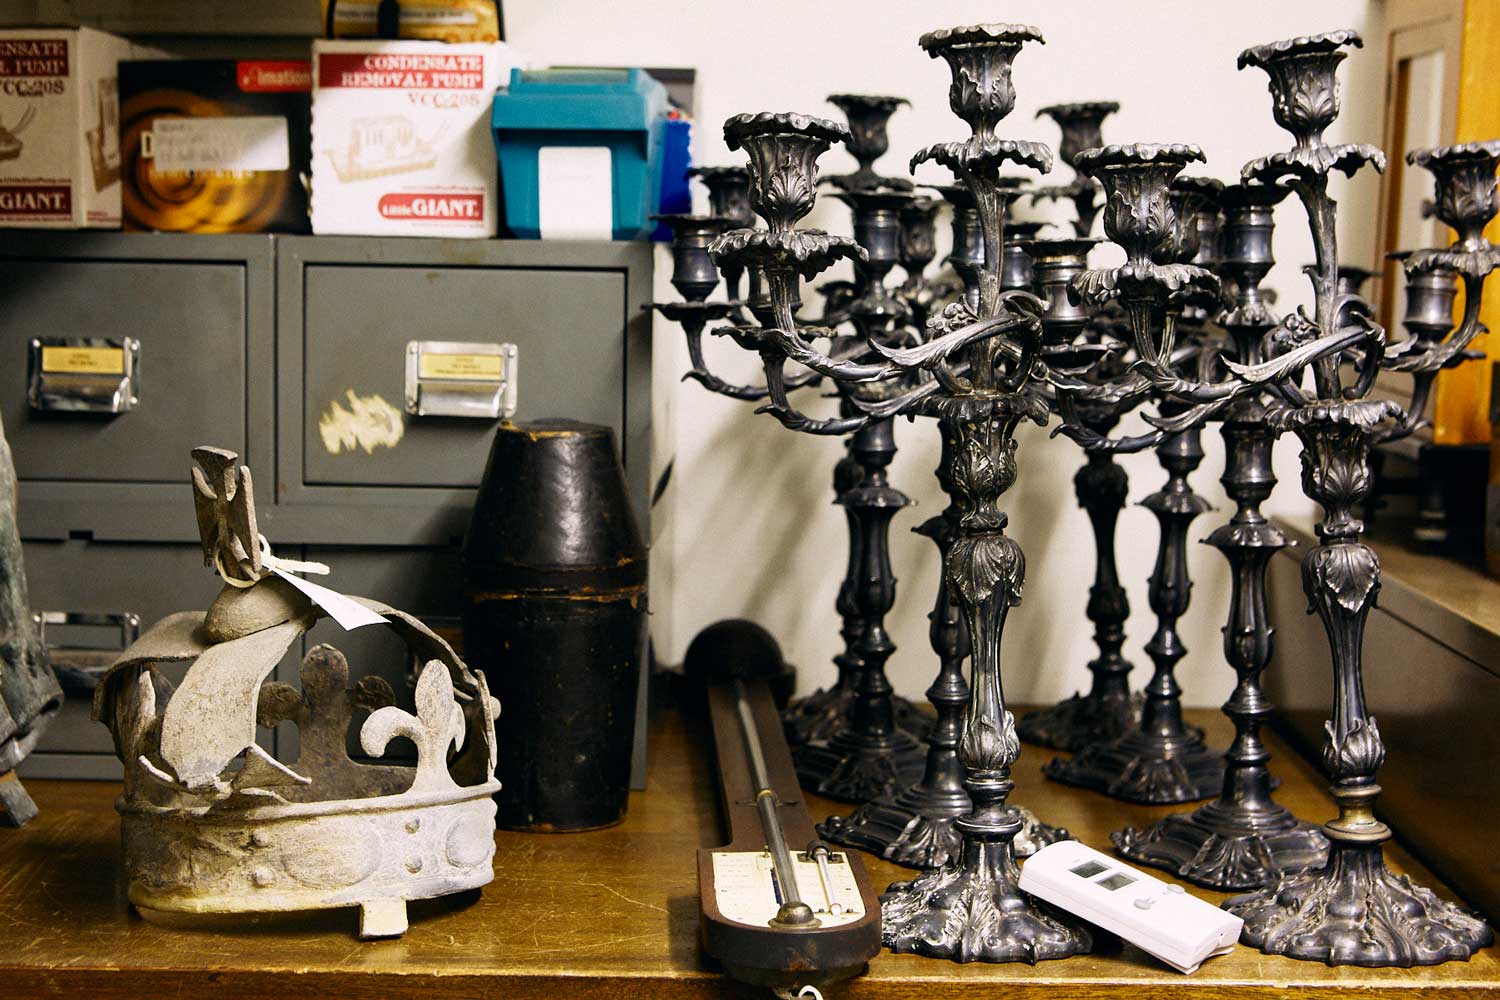 Candlesticks and crown from the Barts museum collections